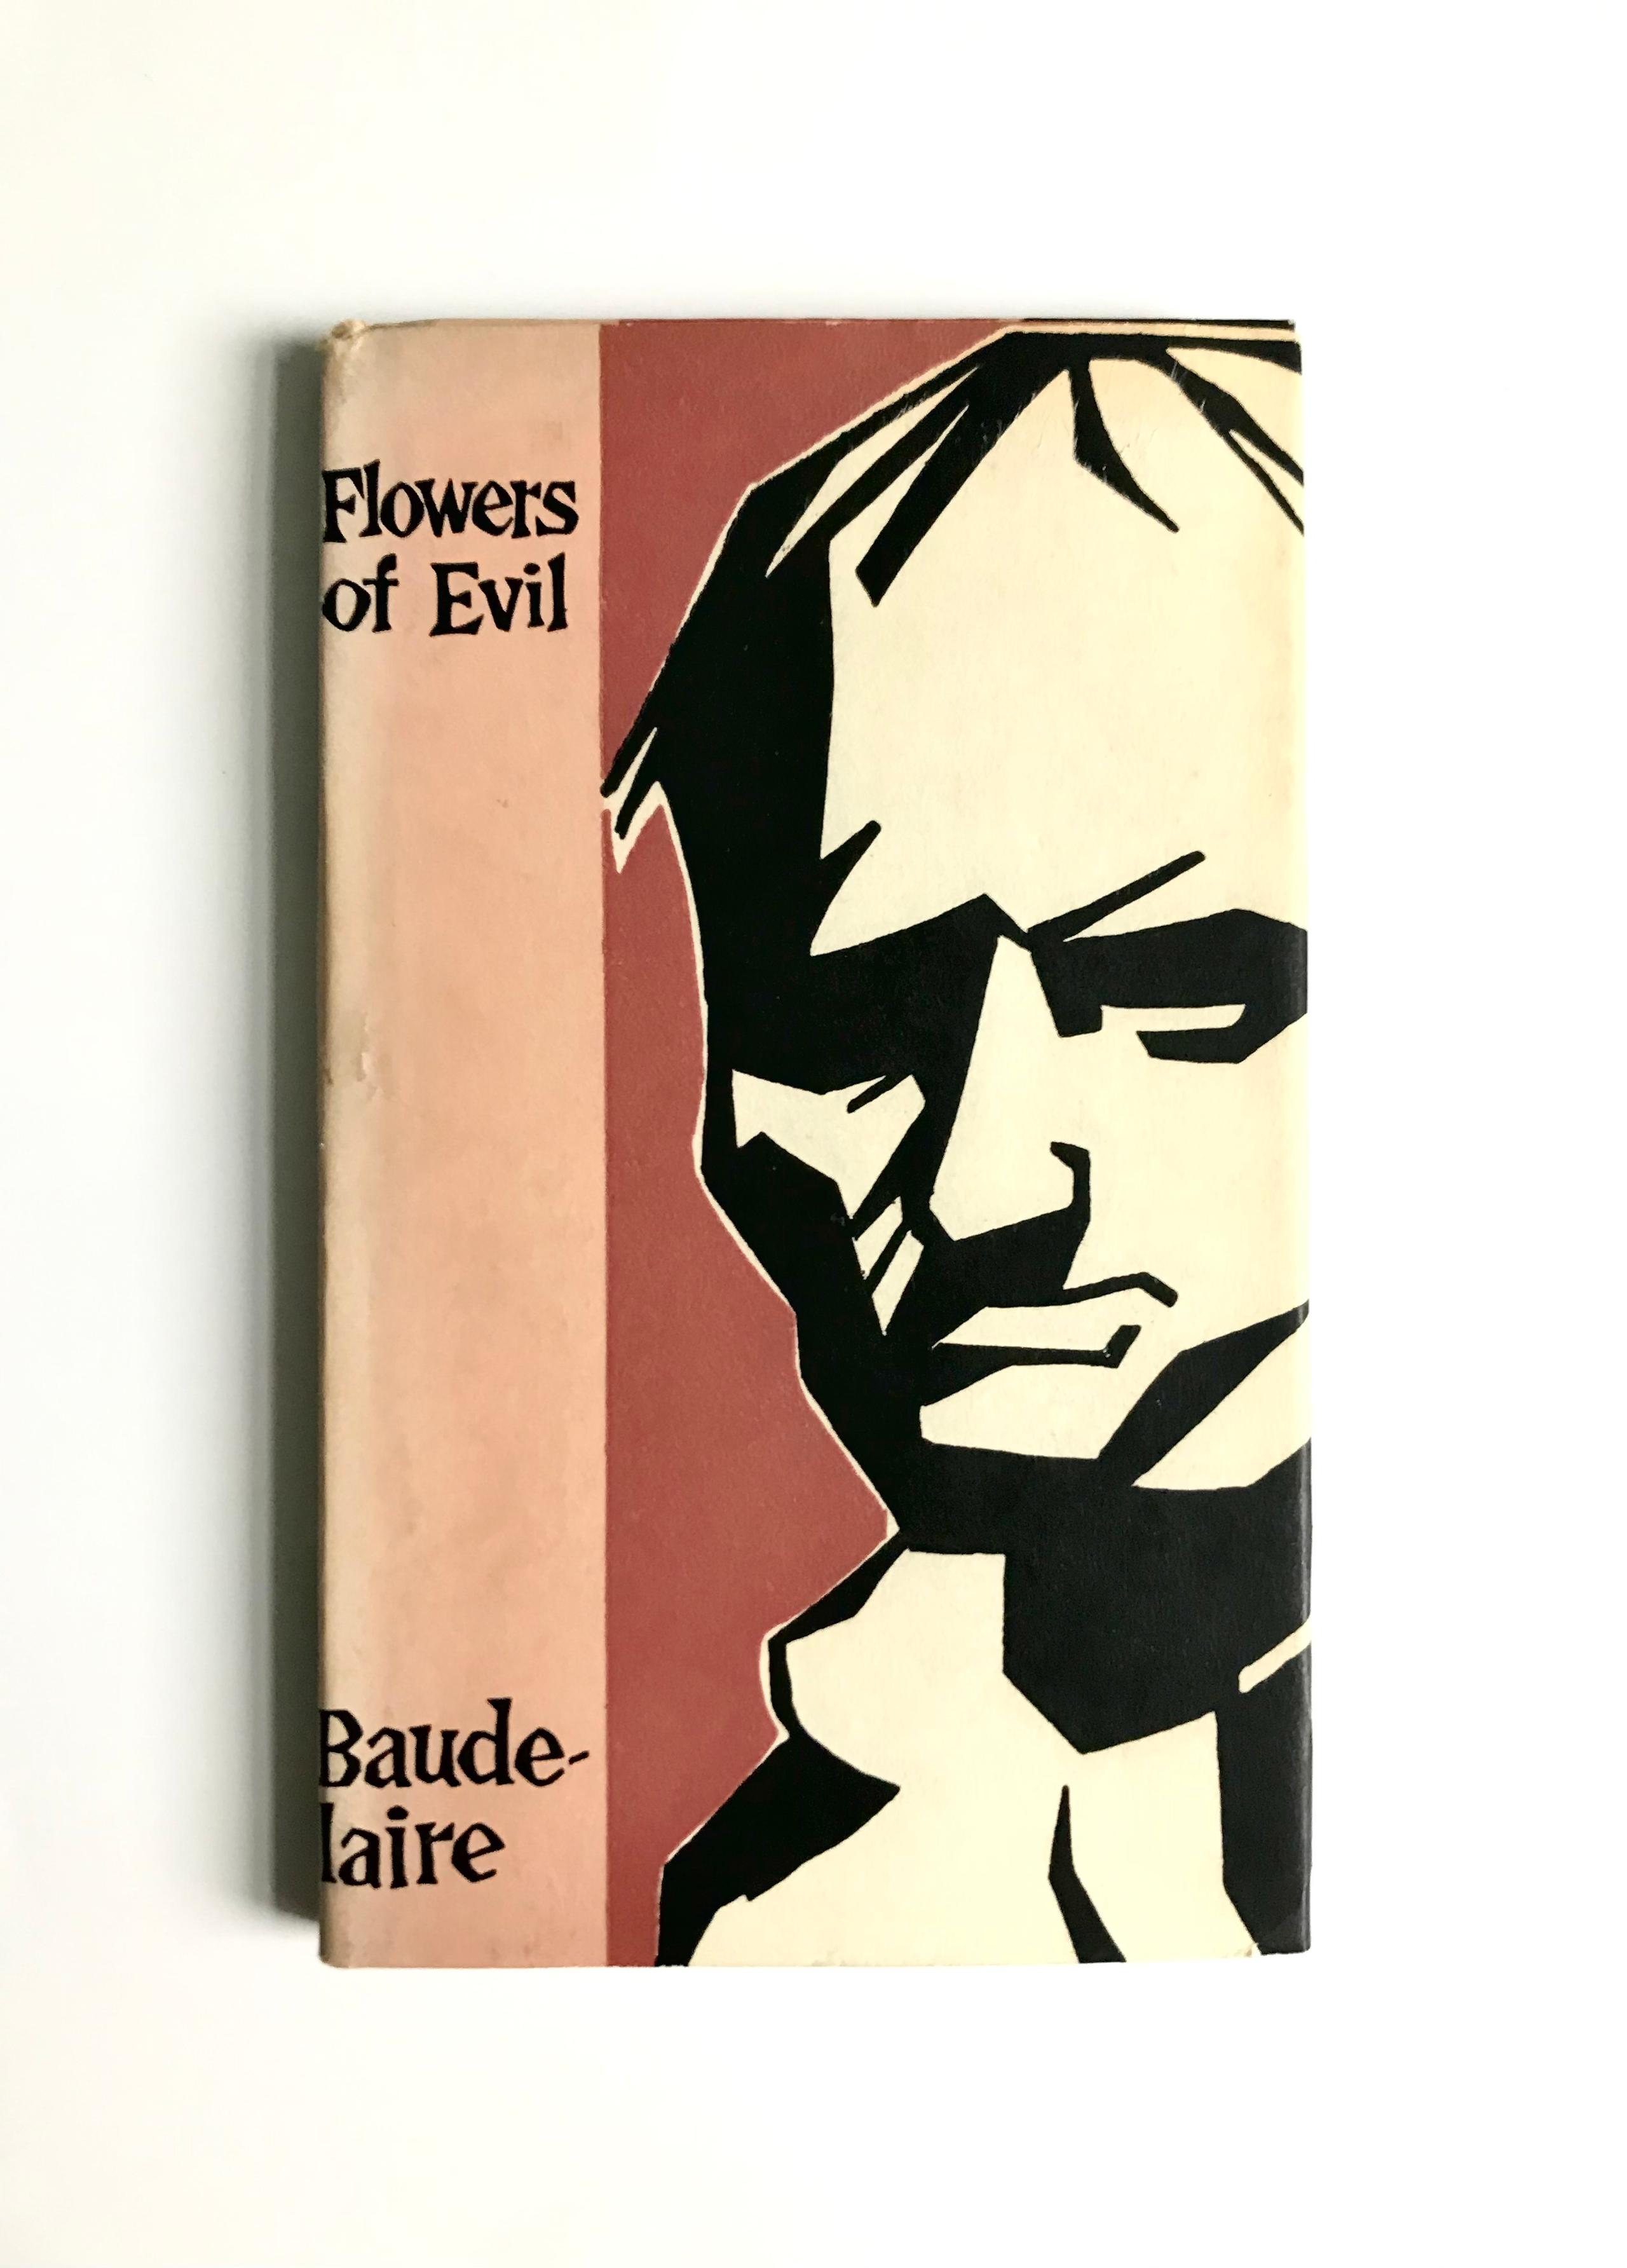 Flowers of Evil by Charles Baudelaire